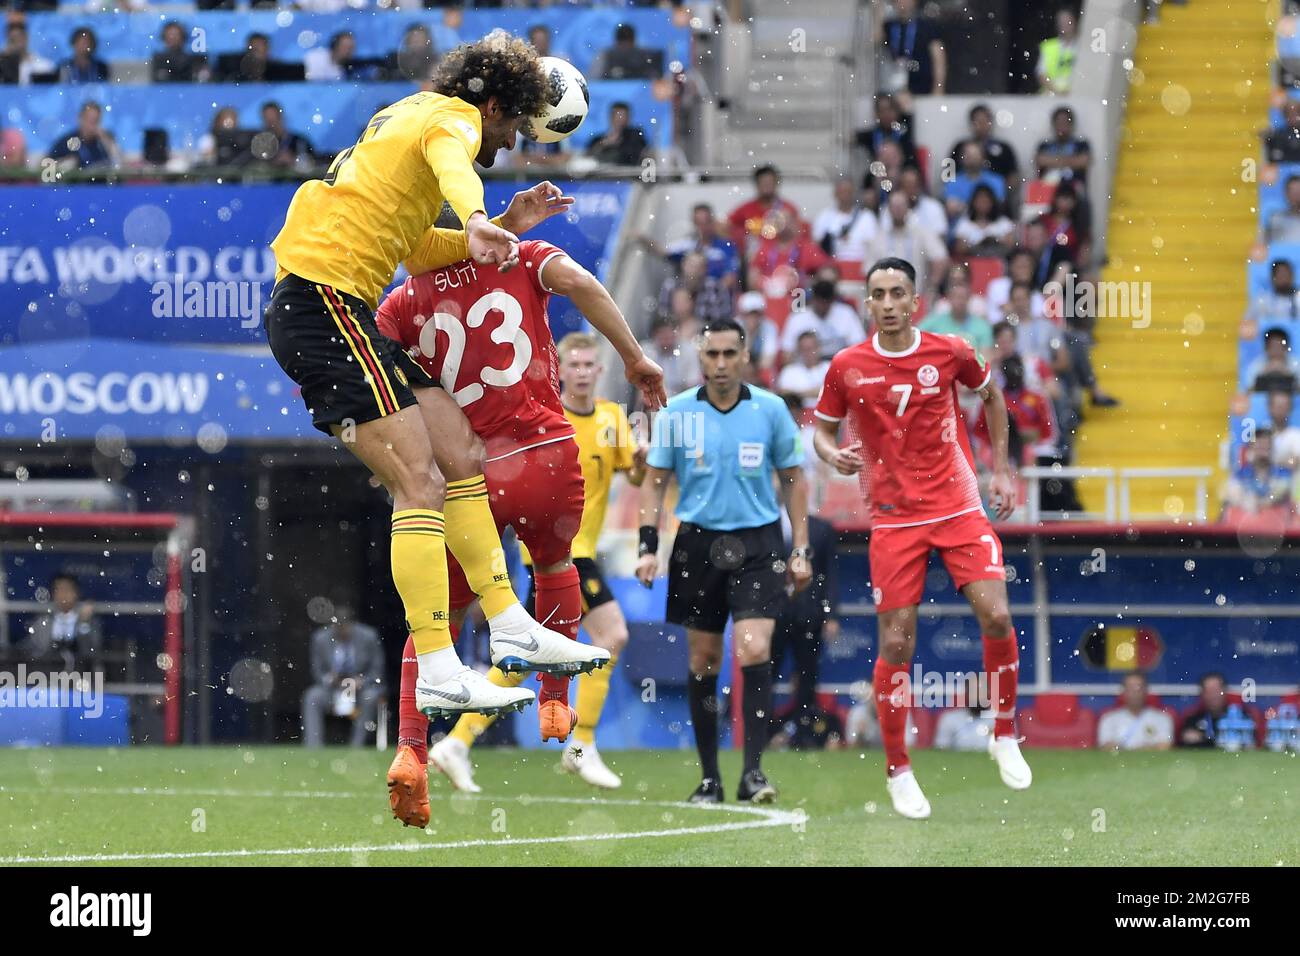 Belgium's Marouane Fellaini and Tunesia's Naim Sliti fight for the ball during the second game of Belgian national soccer team the Red Devils against Tunisia national team in the Spartak stadium, in Moscow, Russia, Saturday 23 June 2018. Belgium won its first group phase game. BELGA PHOTO DIRK WAEM Stock Photo